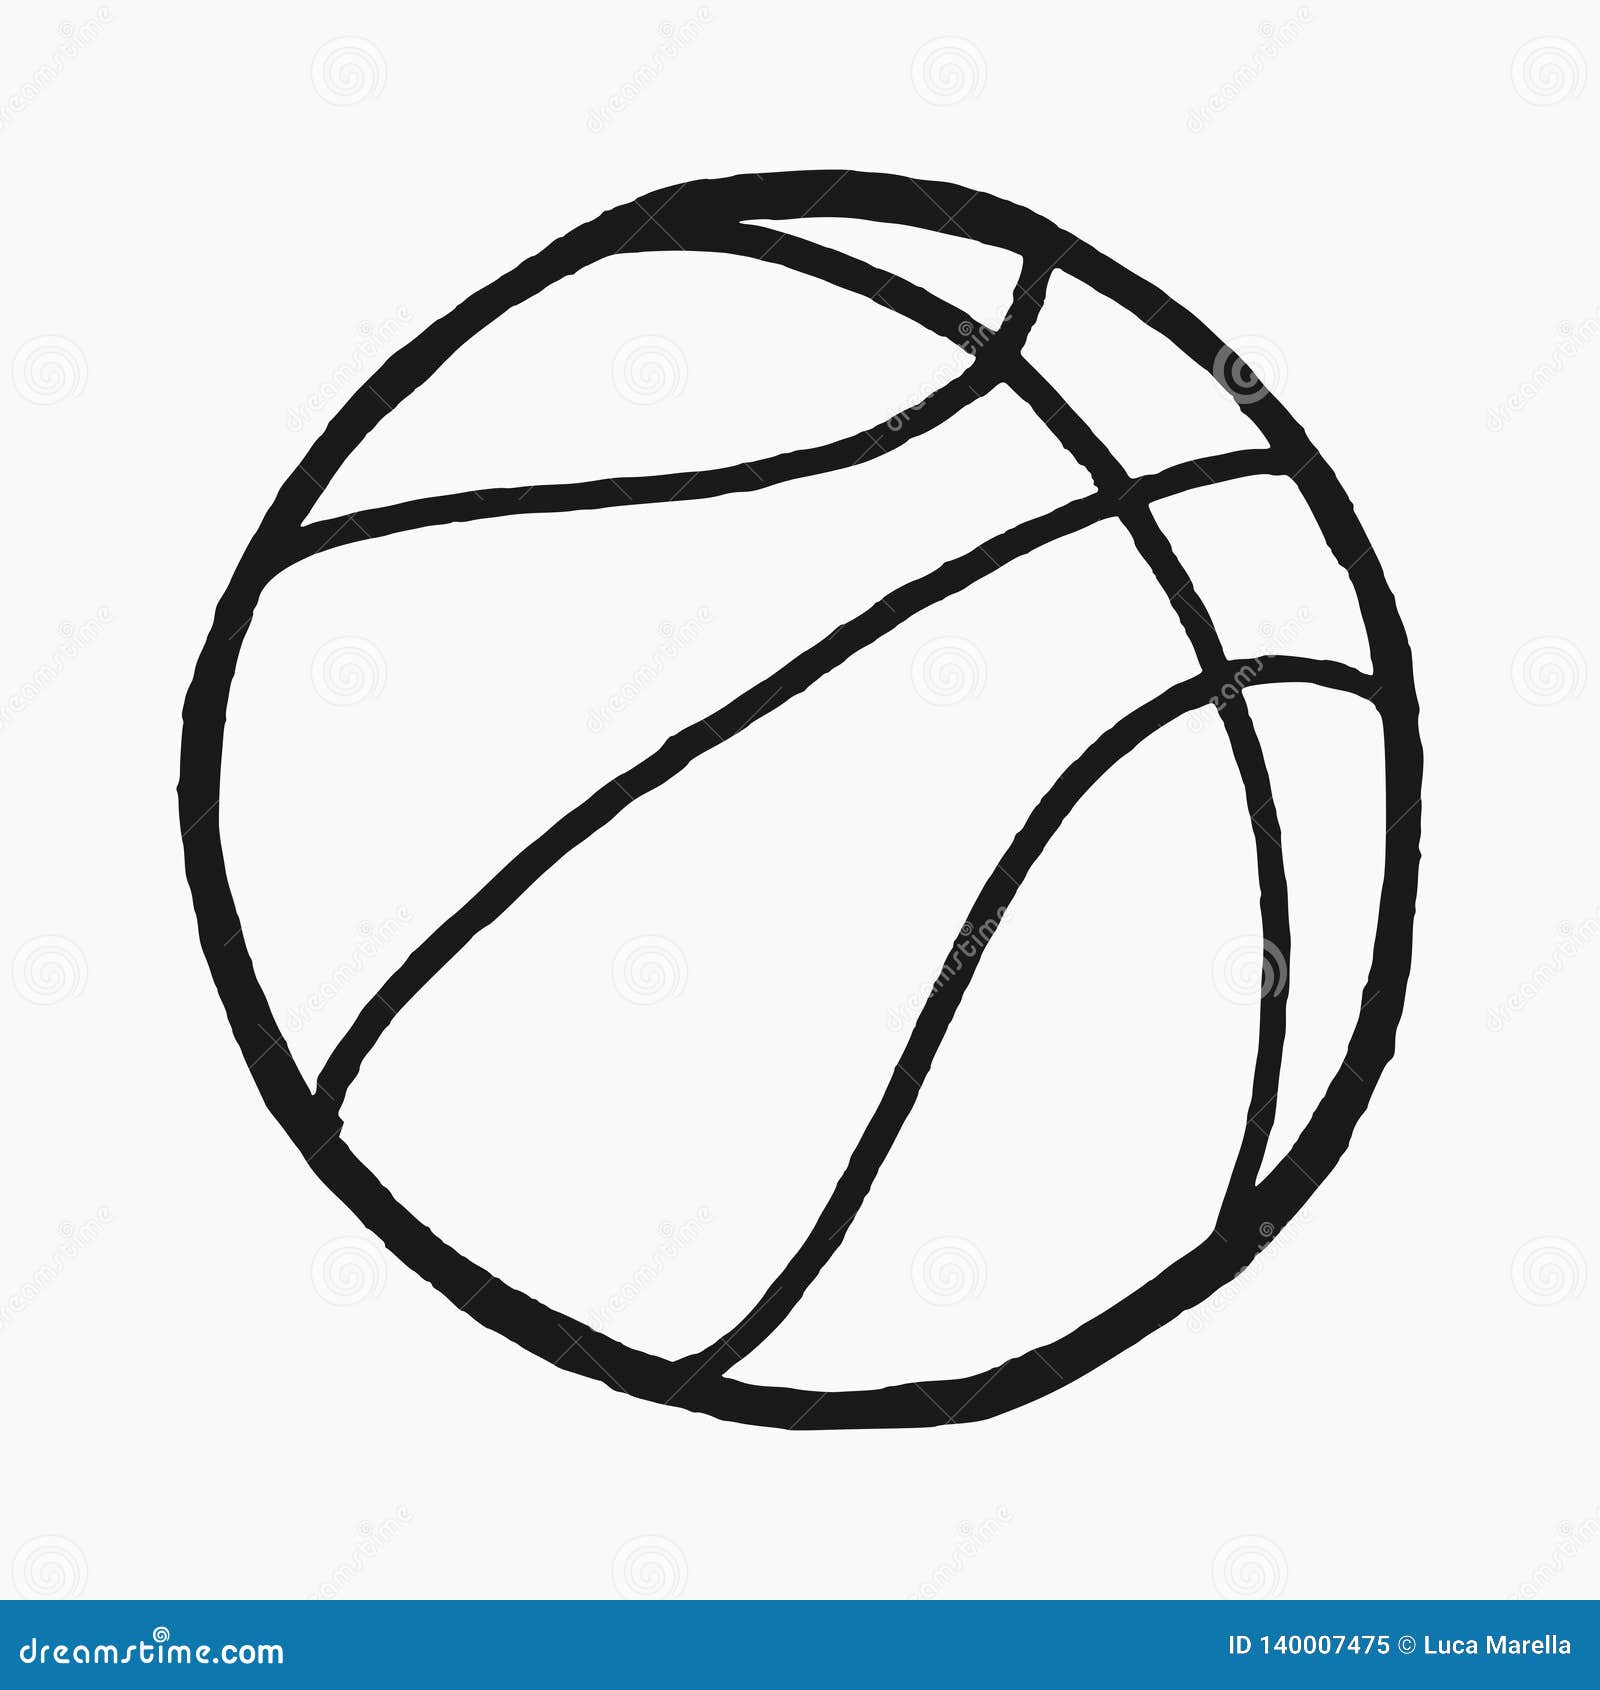 Hand Drawn Vector Illustration of a Basketball Ball Isolated on White